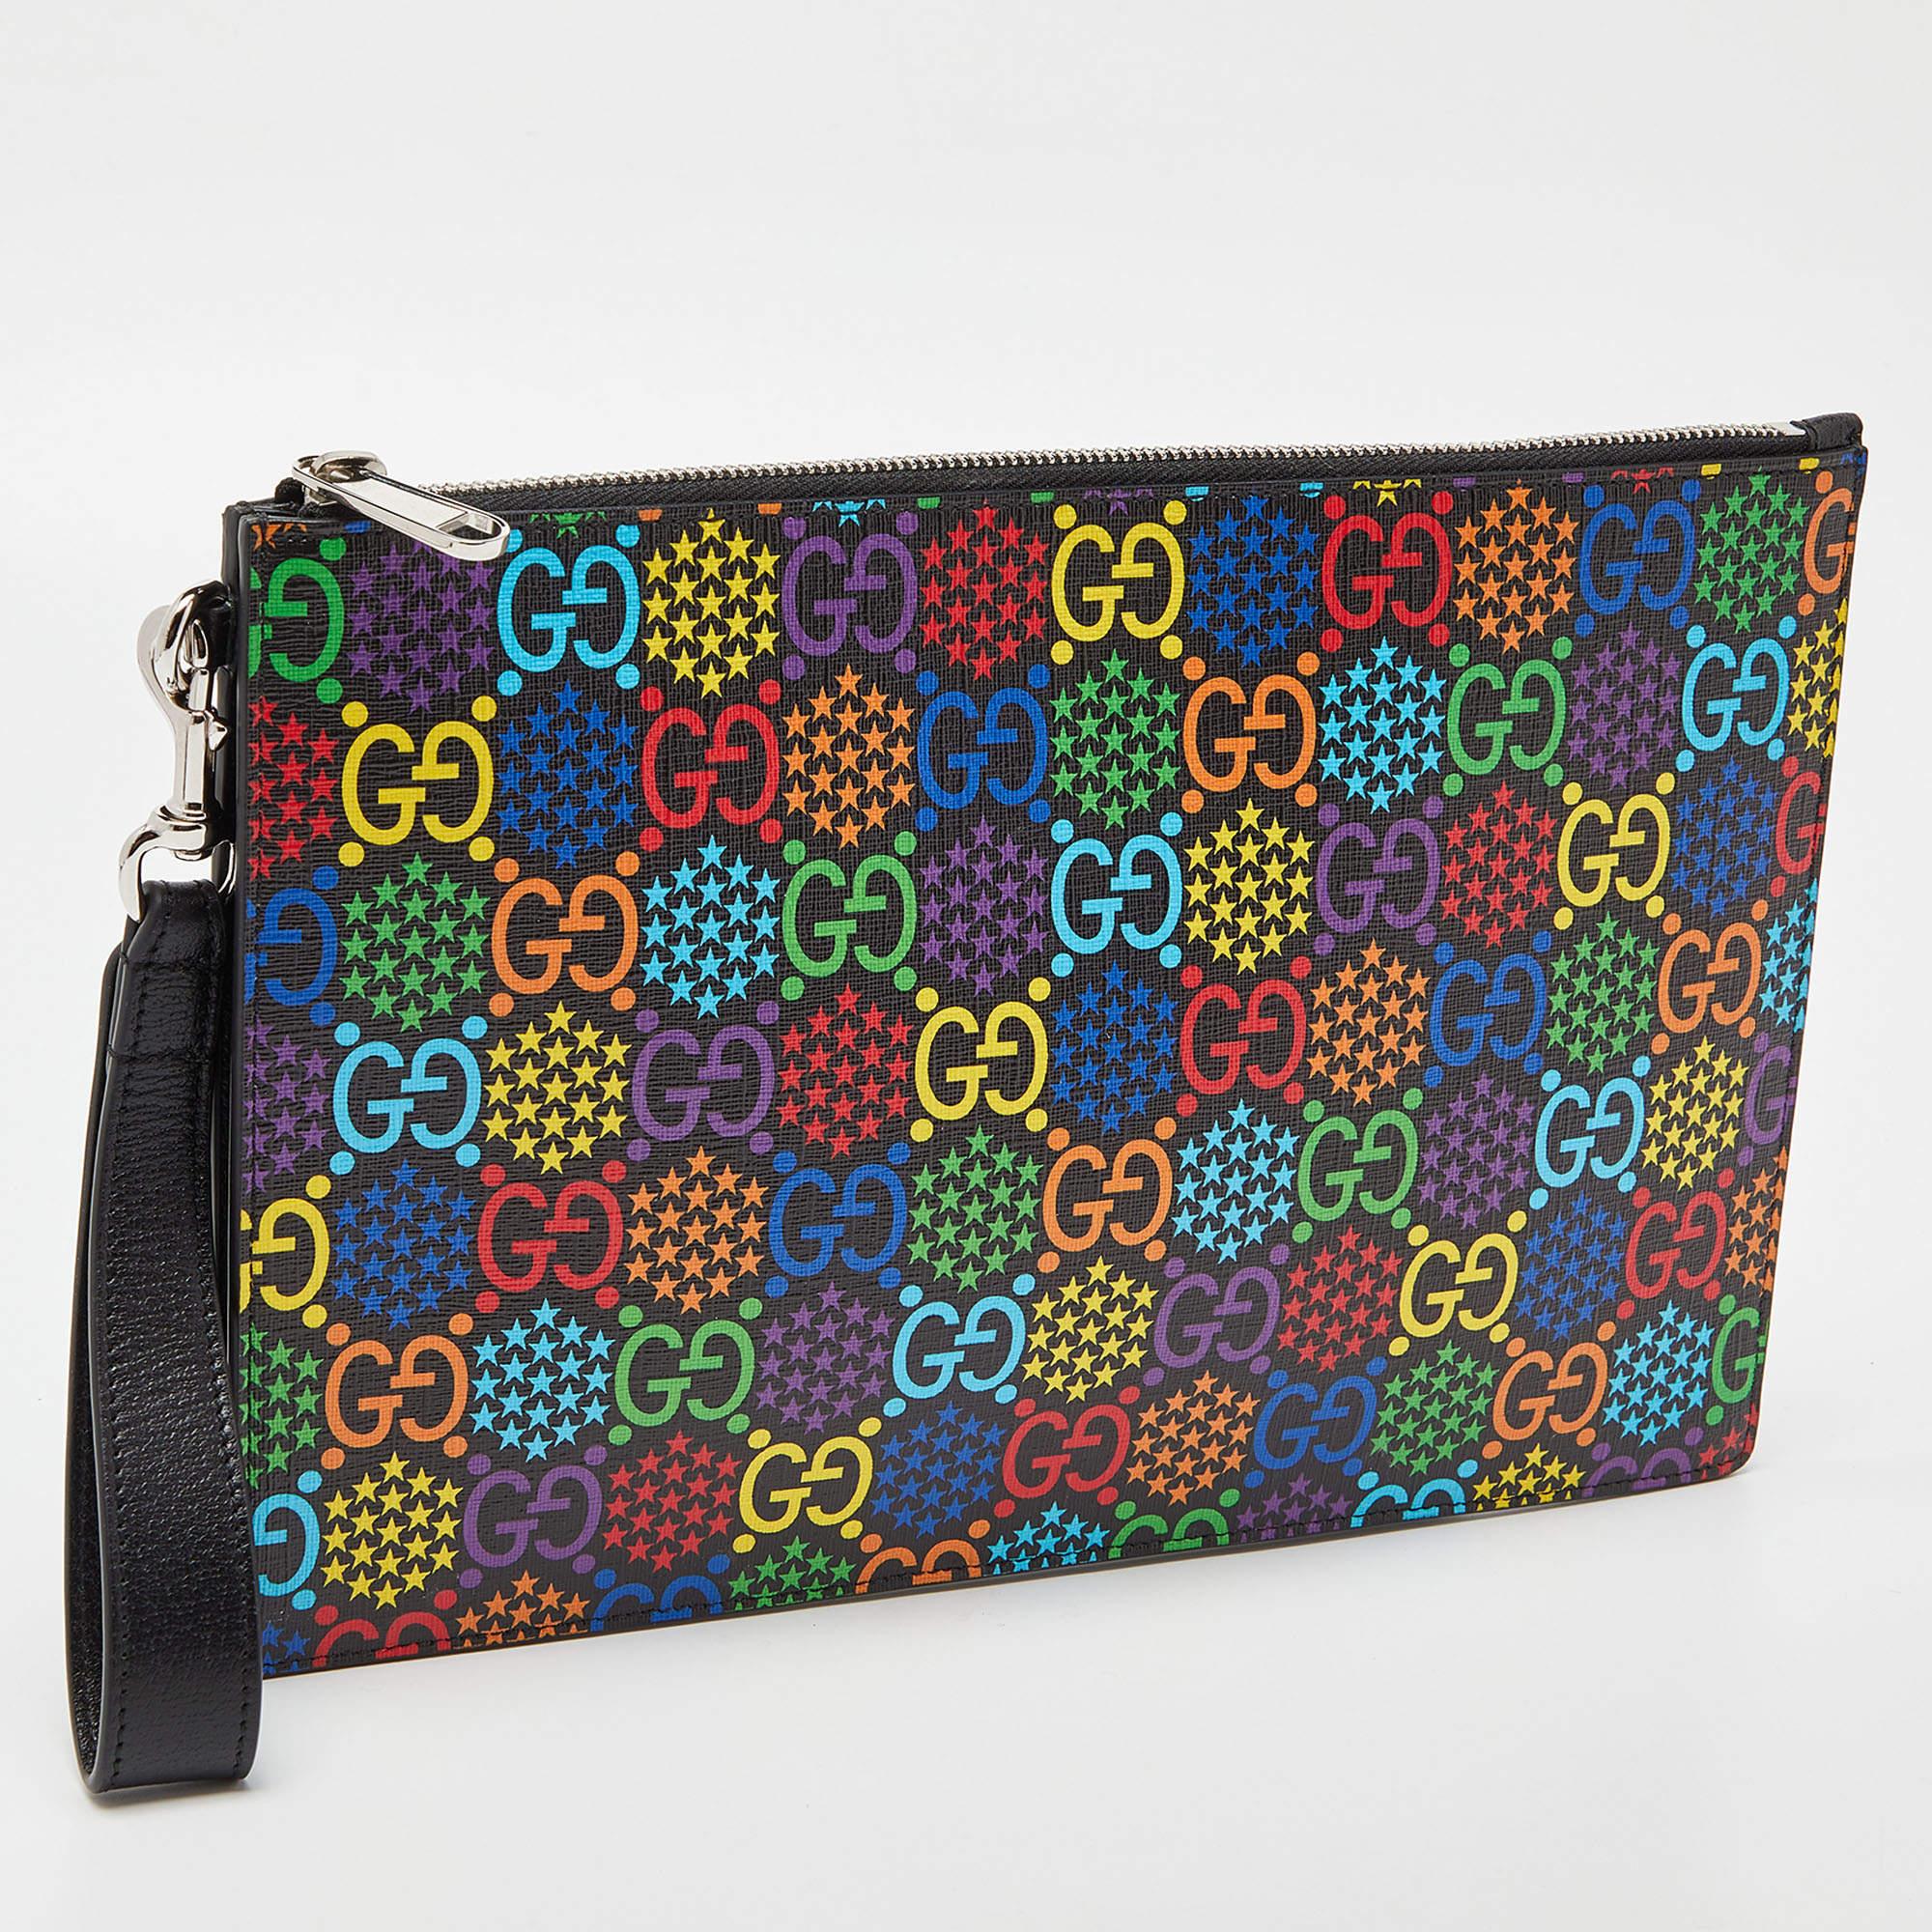 Women's Gucci Multicolor GG Supreme Canvas and Leather Psychedelic Wristlet Clutch